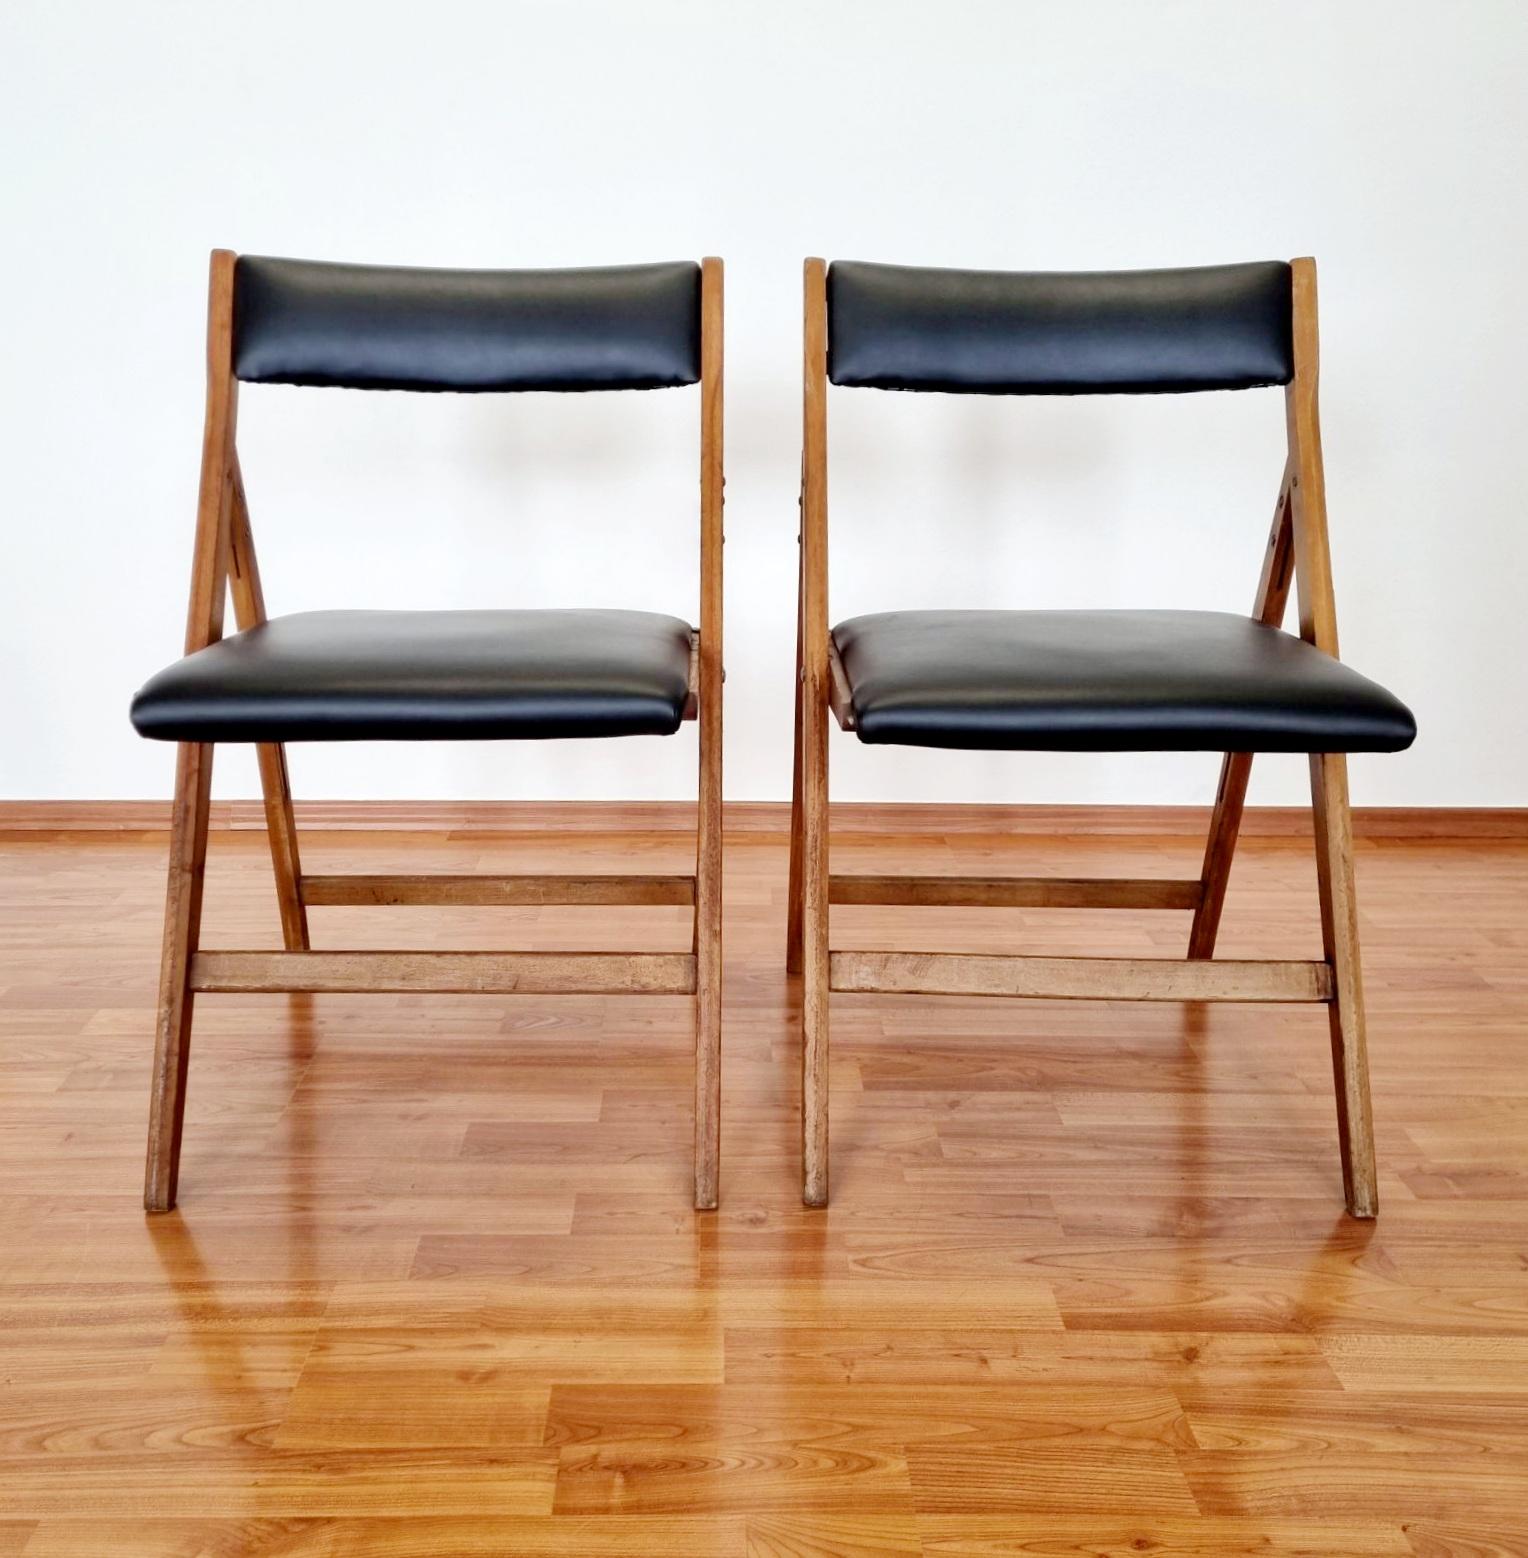 Rare folding chairs design by one of the most famous italian designer Gio Ponti.
This are model Eden from the 60s
Reupholstered
